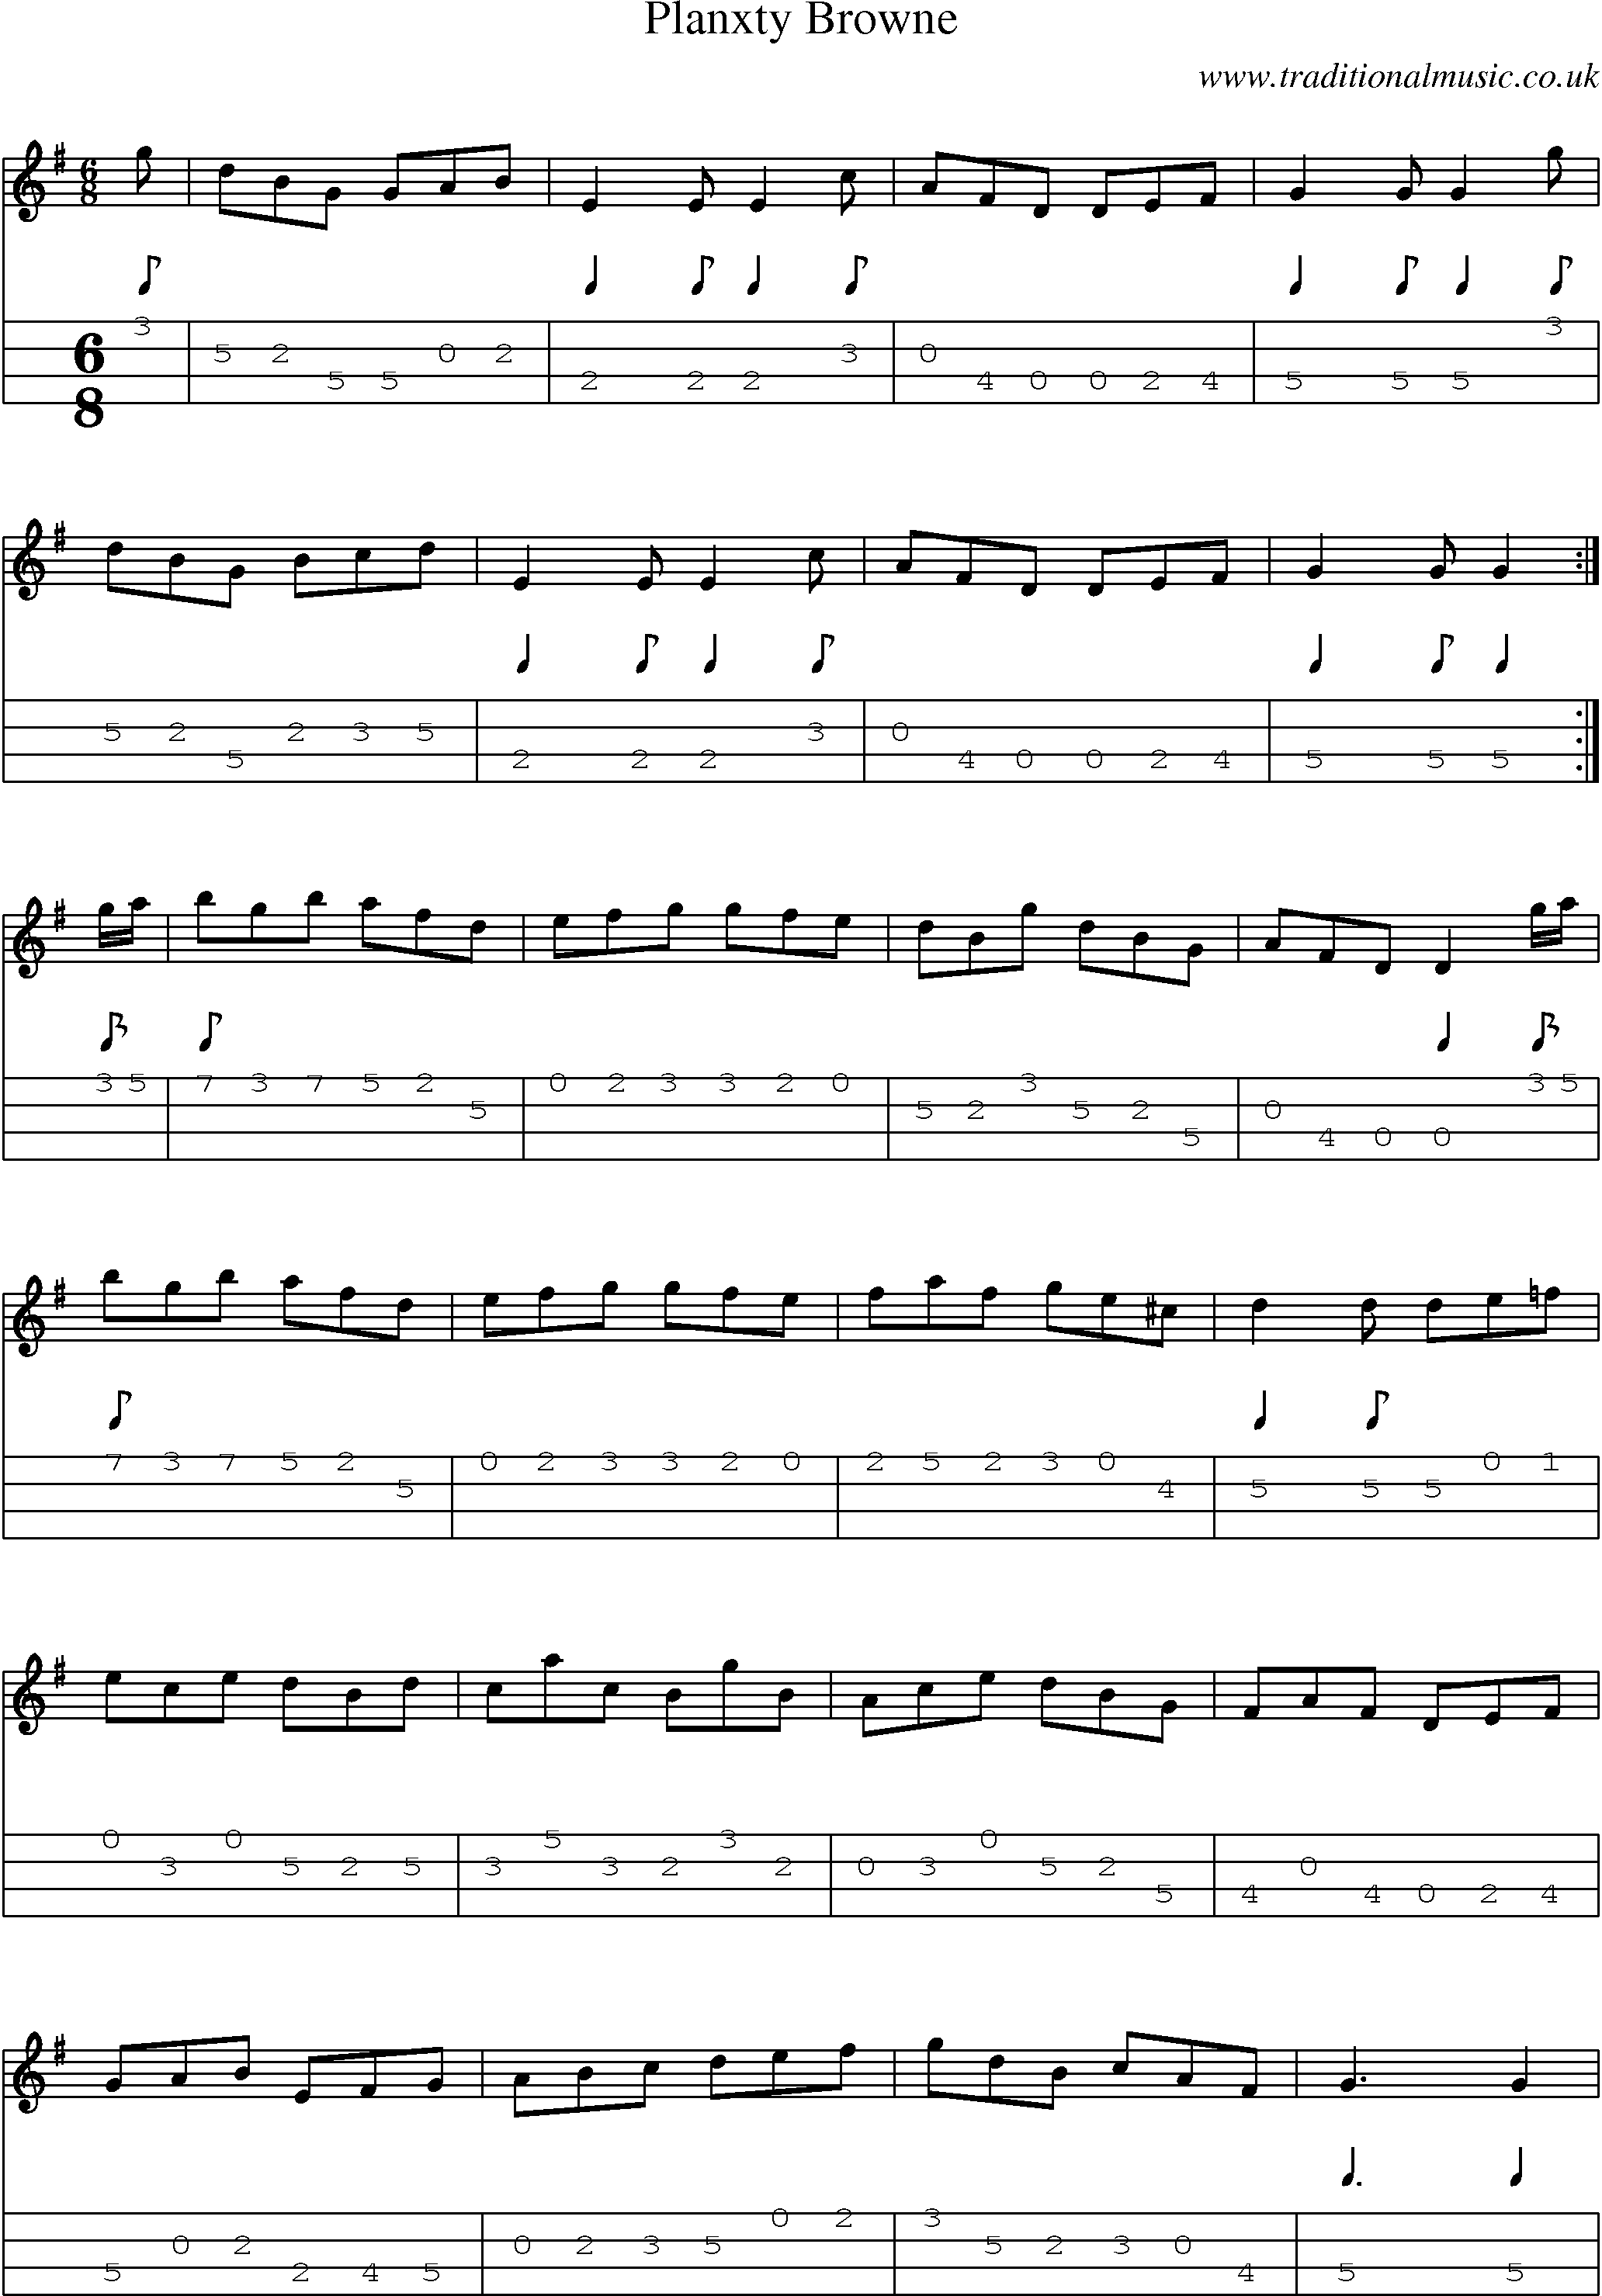 Music Score and Mandolin Tabs for Planxty Browne